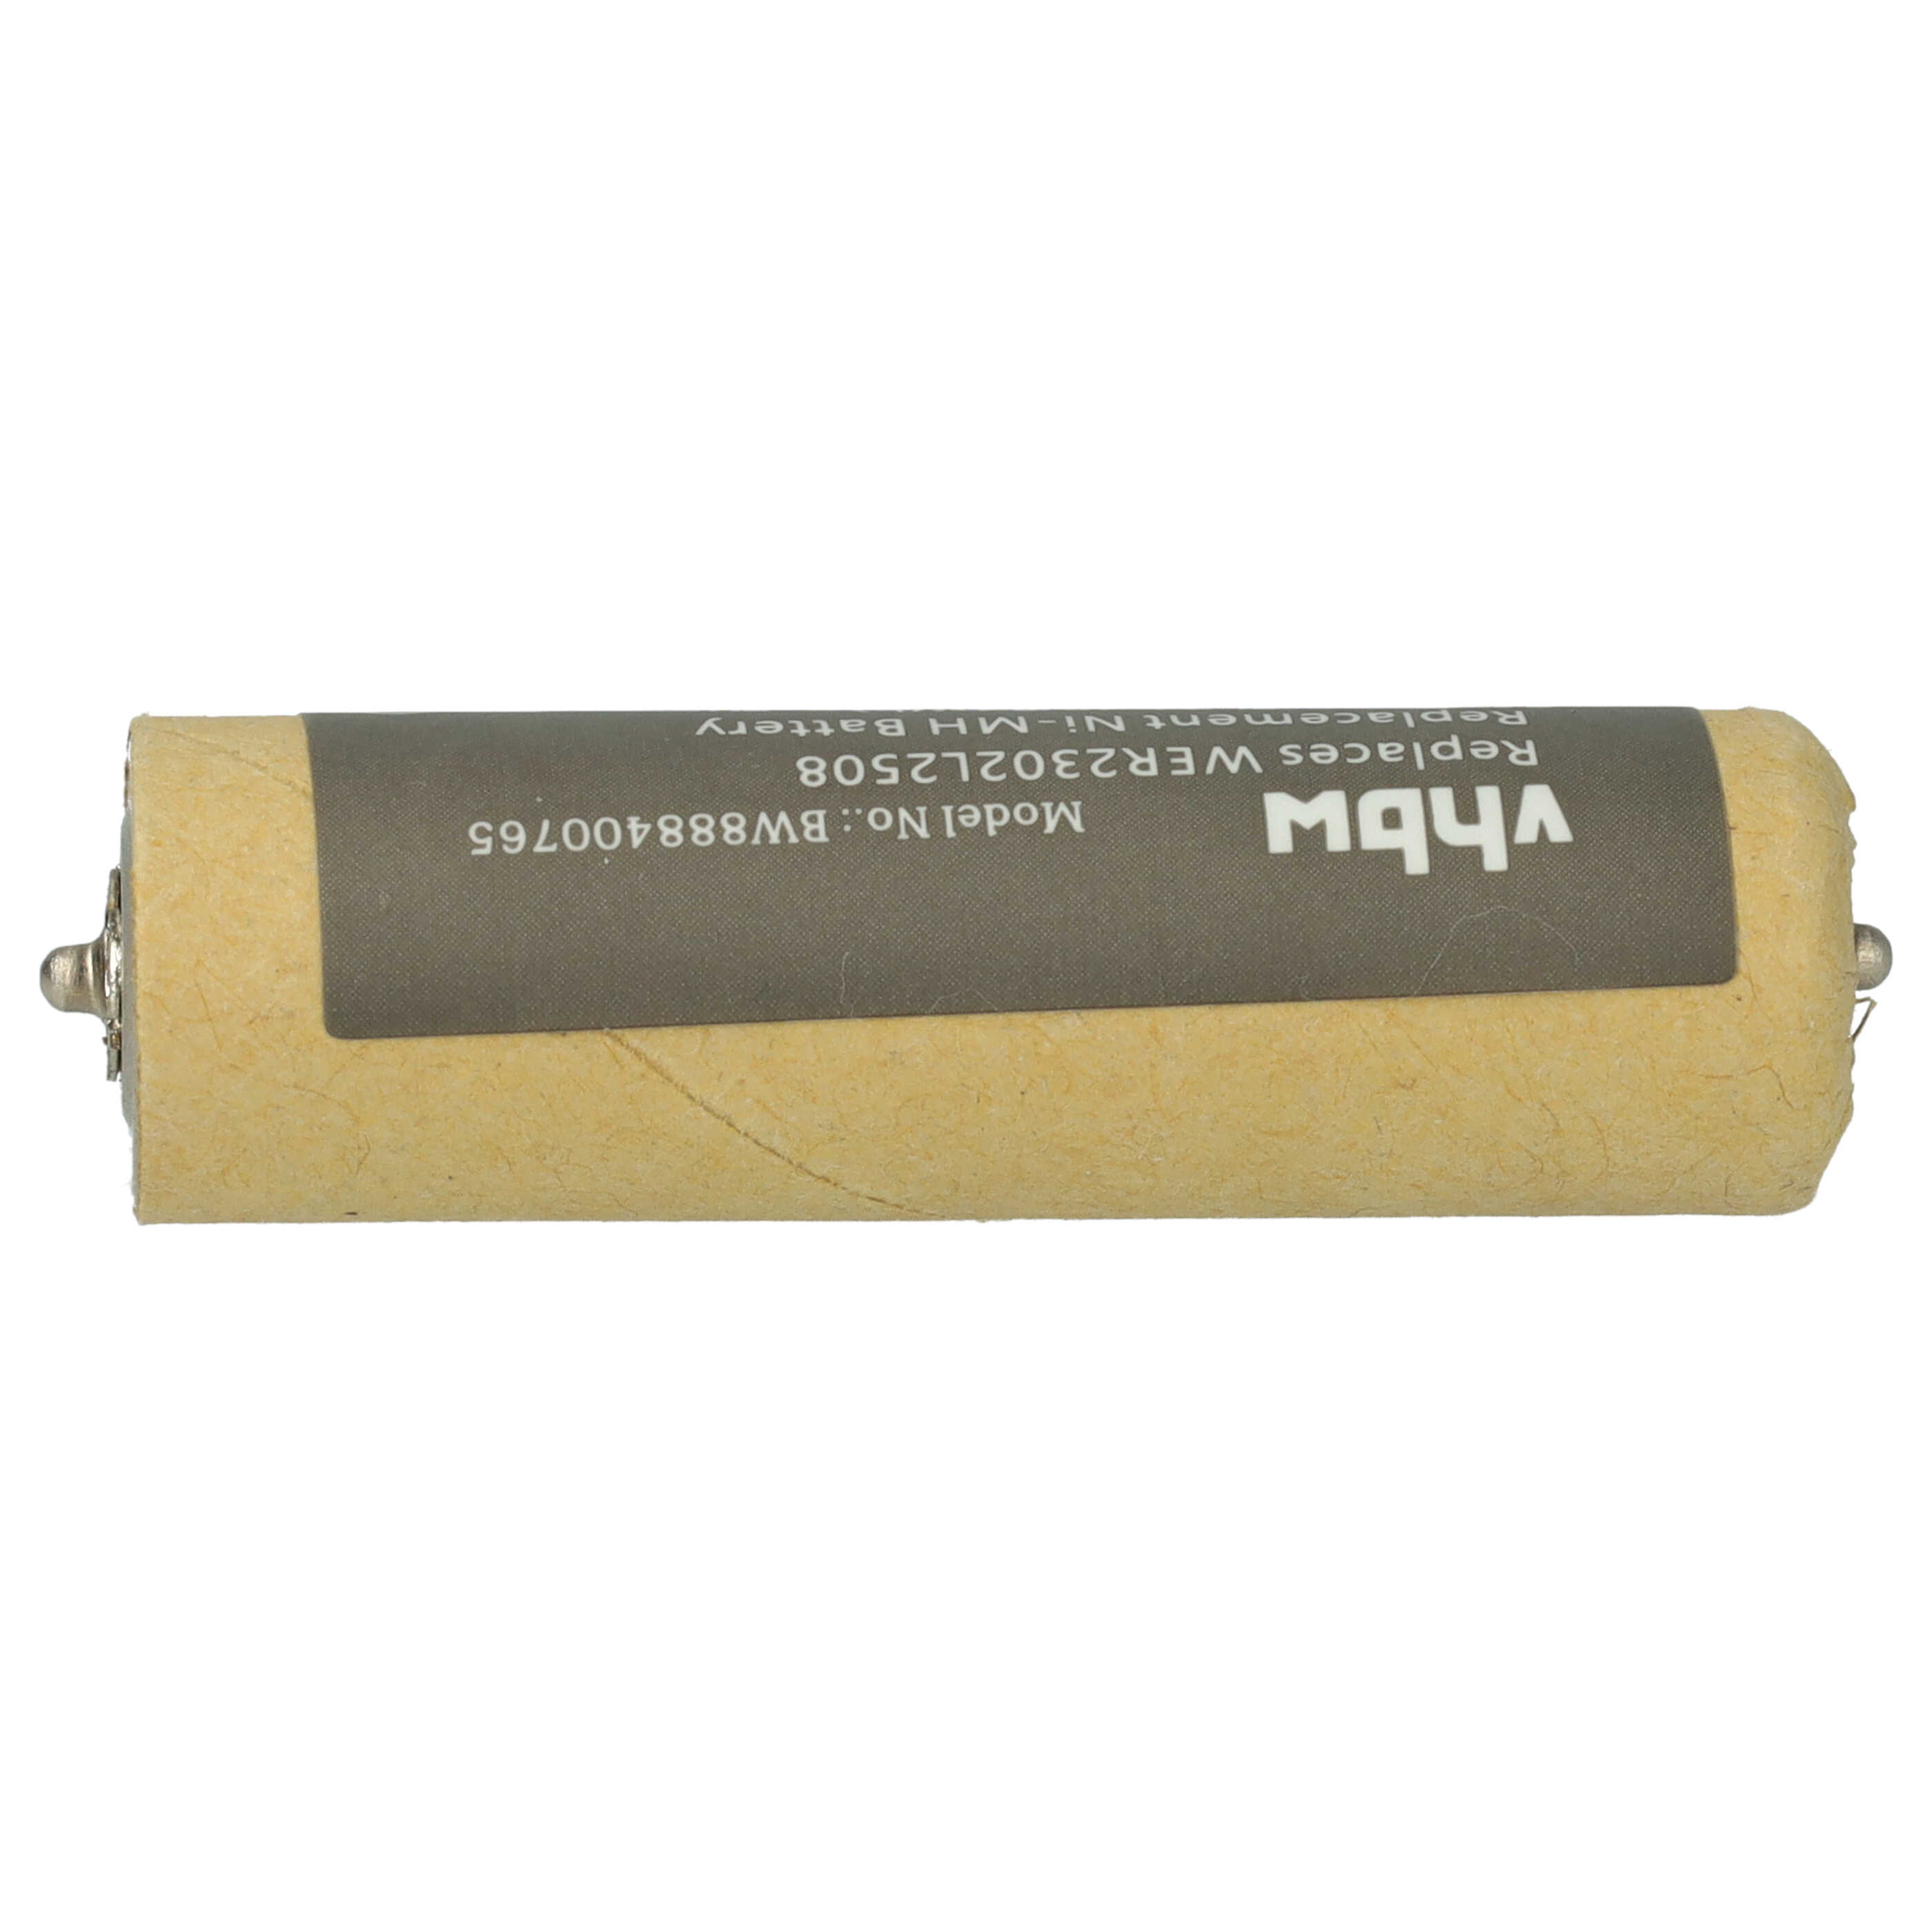 Electric Razor Battery Replacement for Panasonic WER2302L2508 - 700mAh 1.2V NiMH